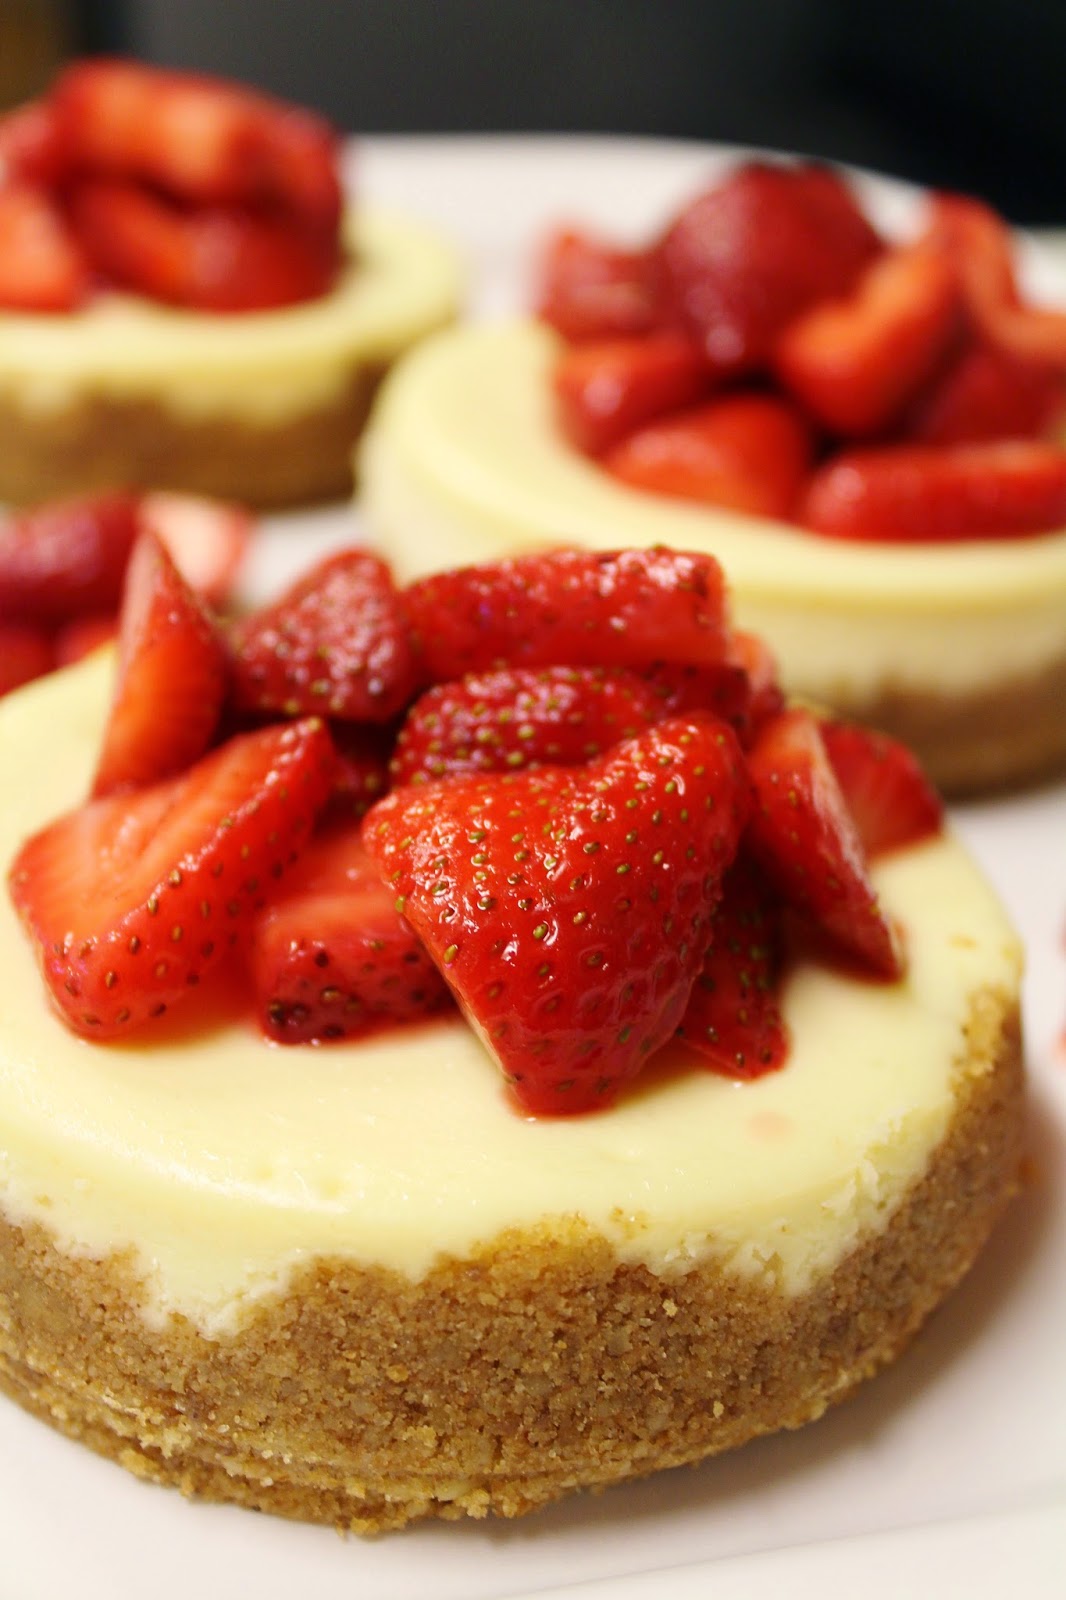 Blog as you Bake Mini Cheesecakes with Macerated Strawberries